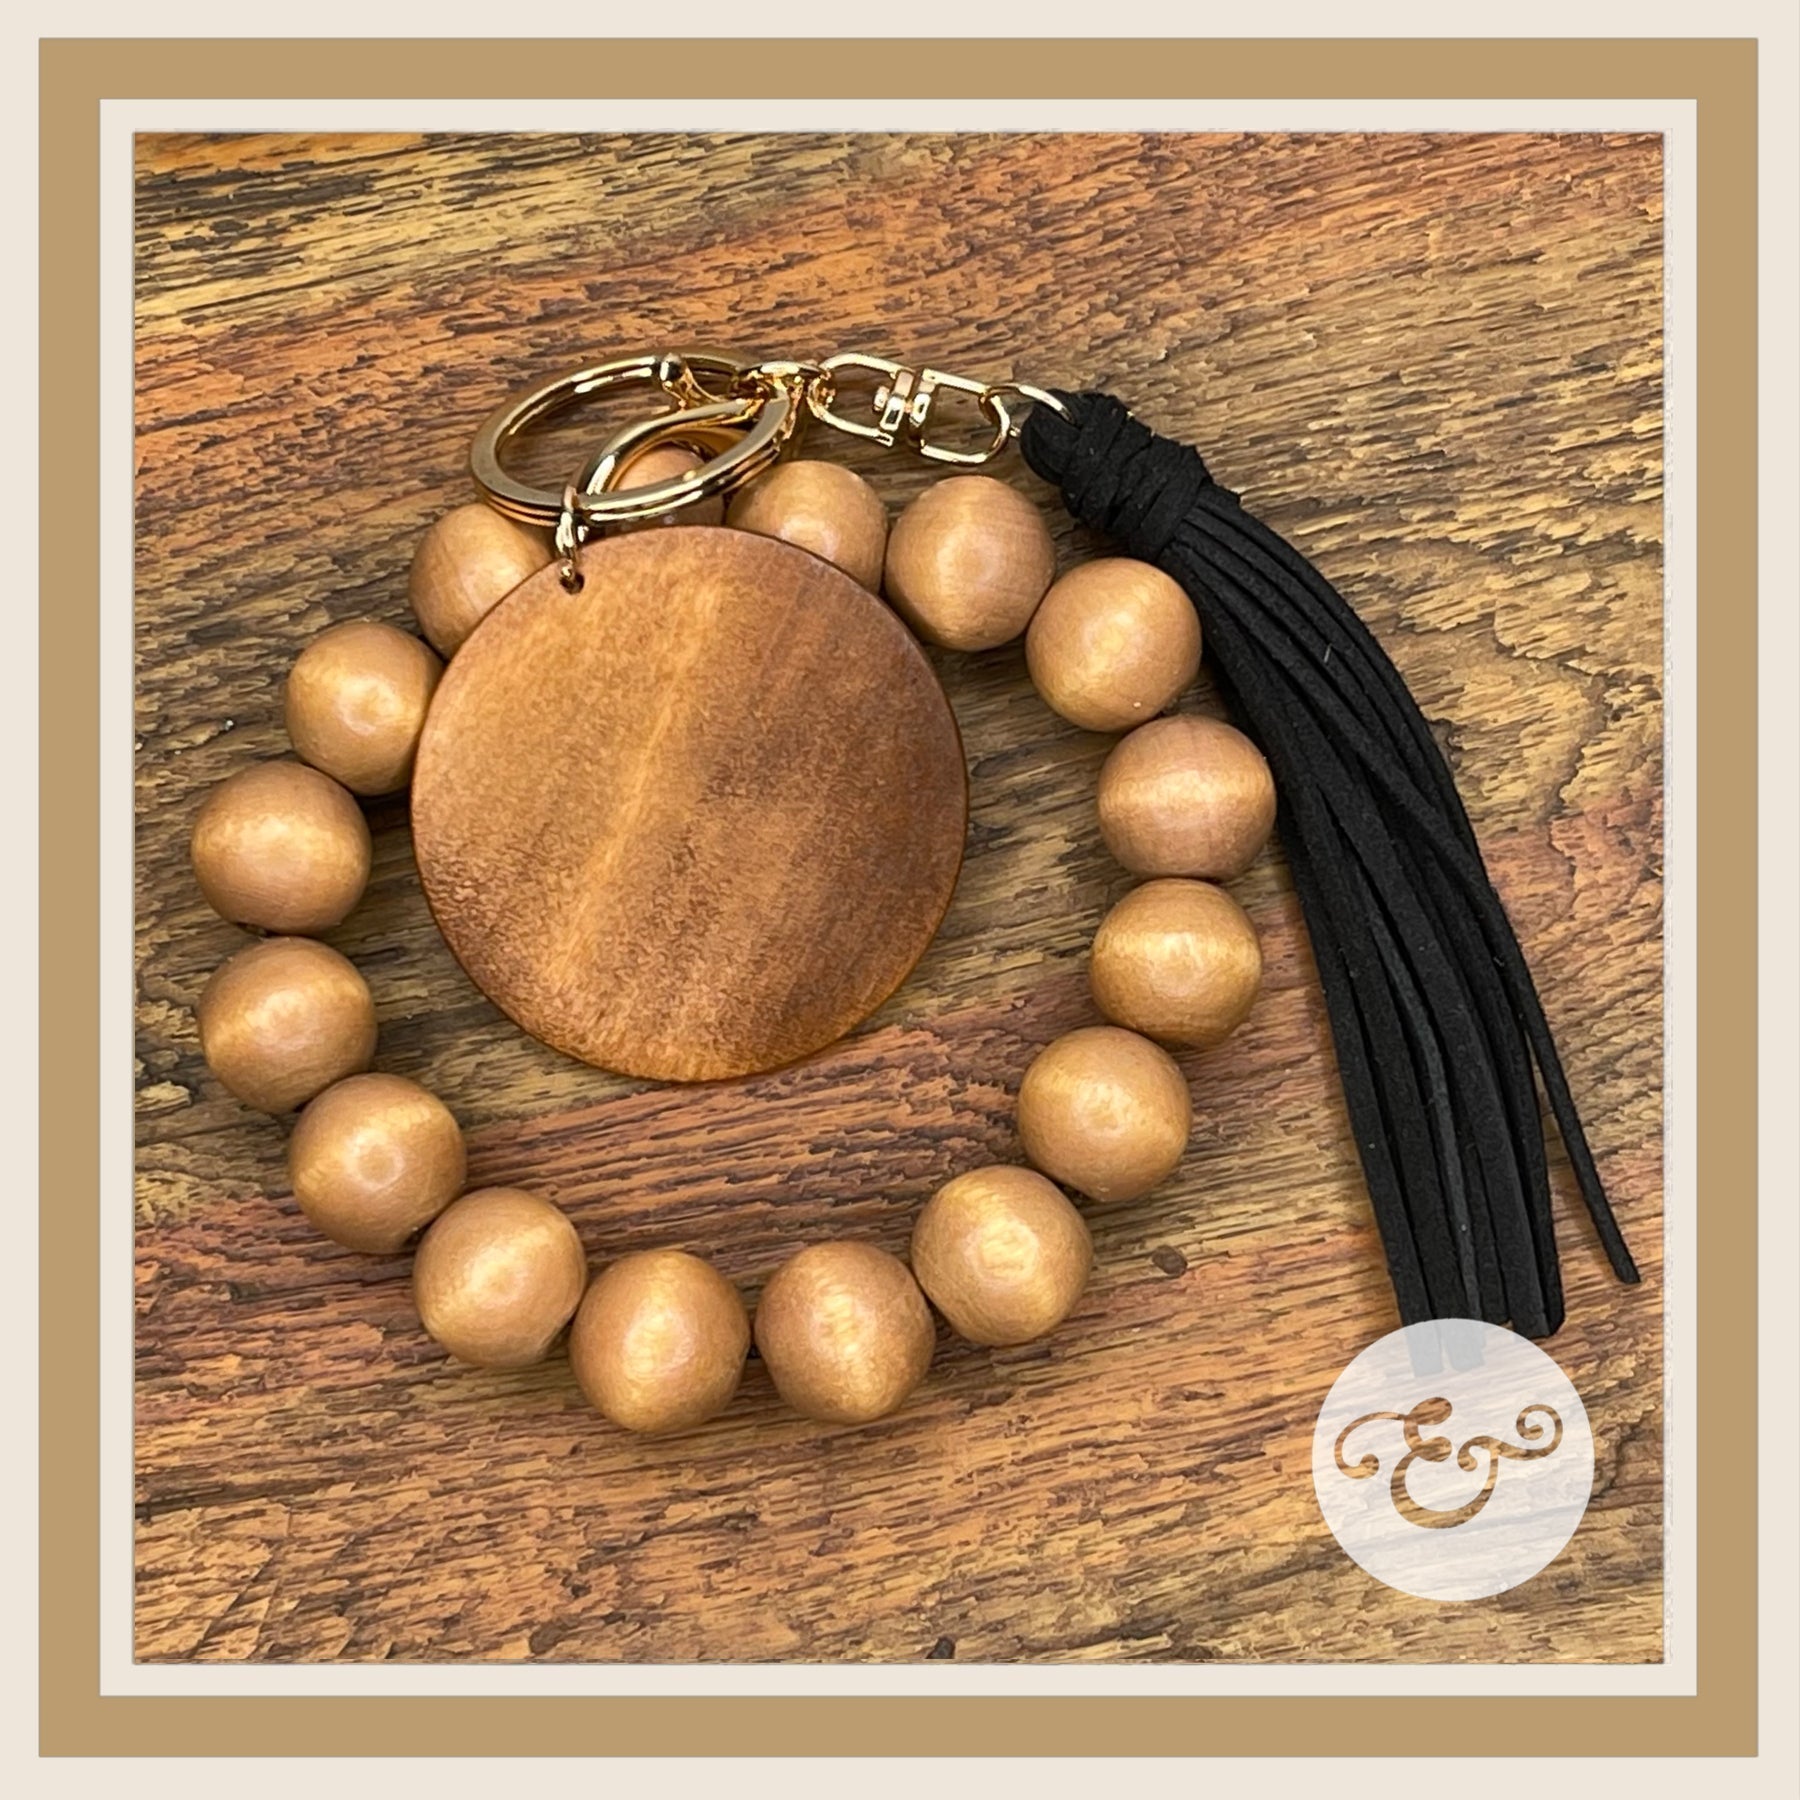 Sunshine Mixed With A Little Hurricane Wooden Bead Wristlet With Suede Tassel (6688719405134) (6688894517326) (6688895270990) (6688896057422)